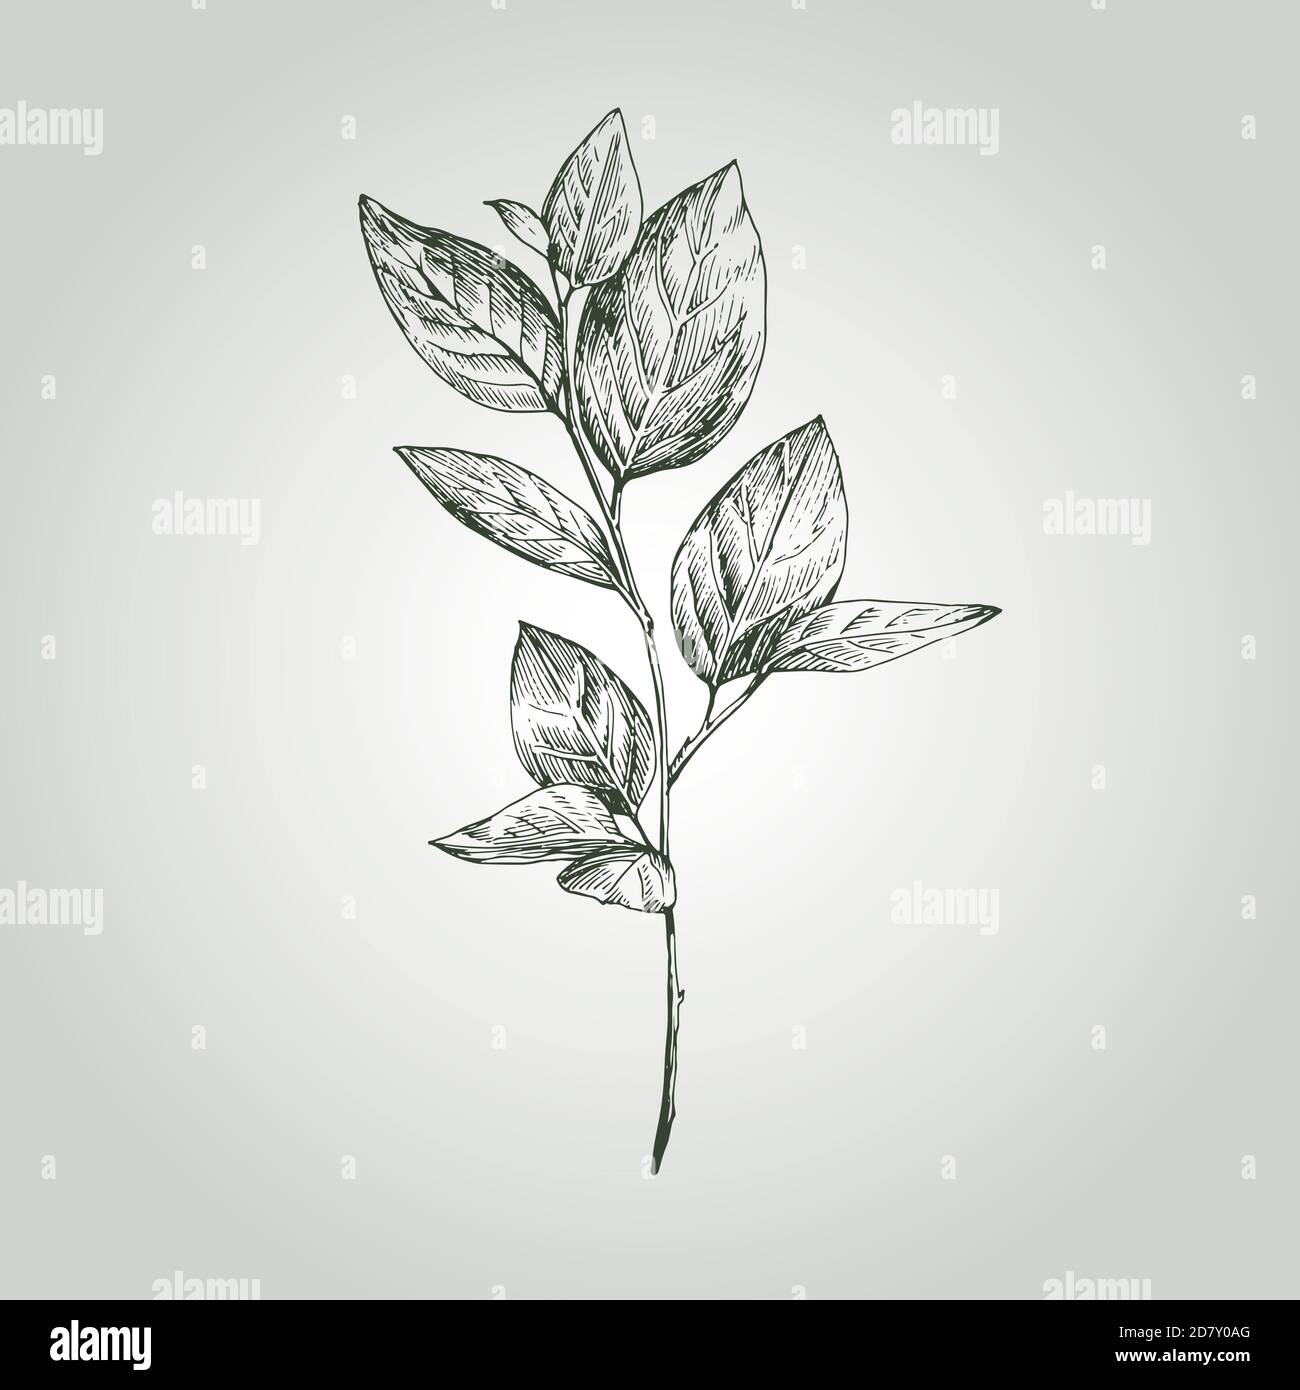 Hand drawn vector illustration of twig with leaves. Wild and free. Perfect for invitations, greetings card, quotes, blogs and posters. Stock Vector